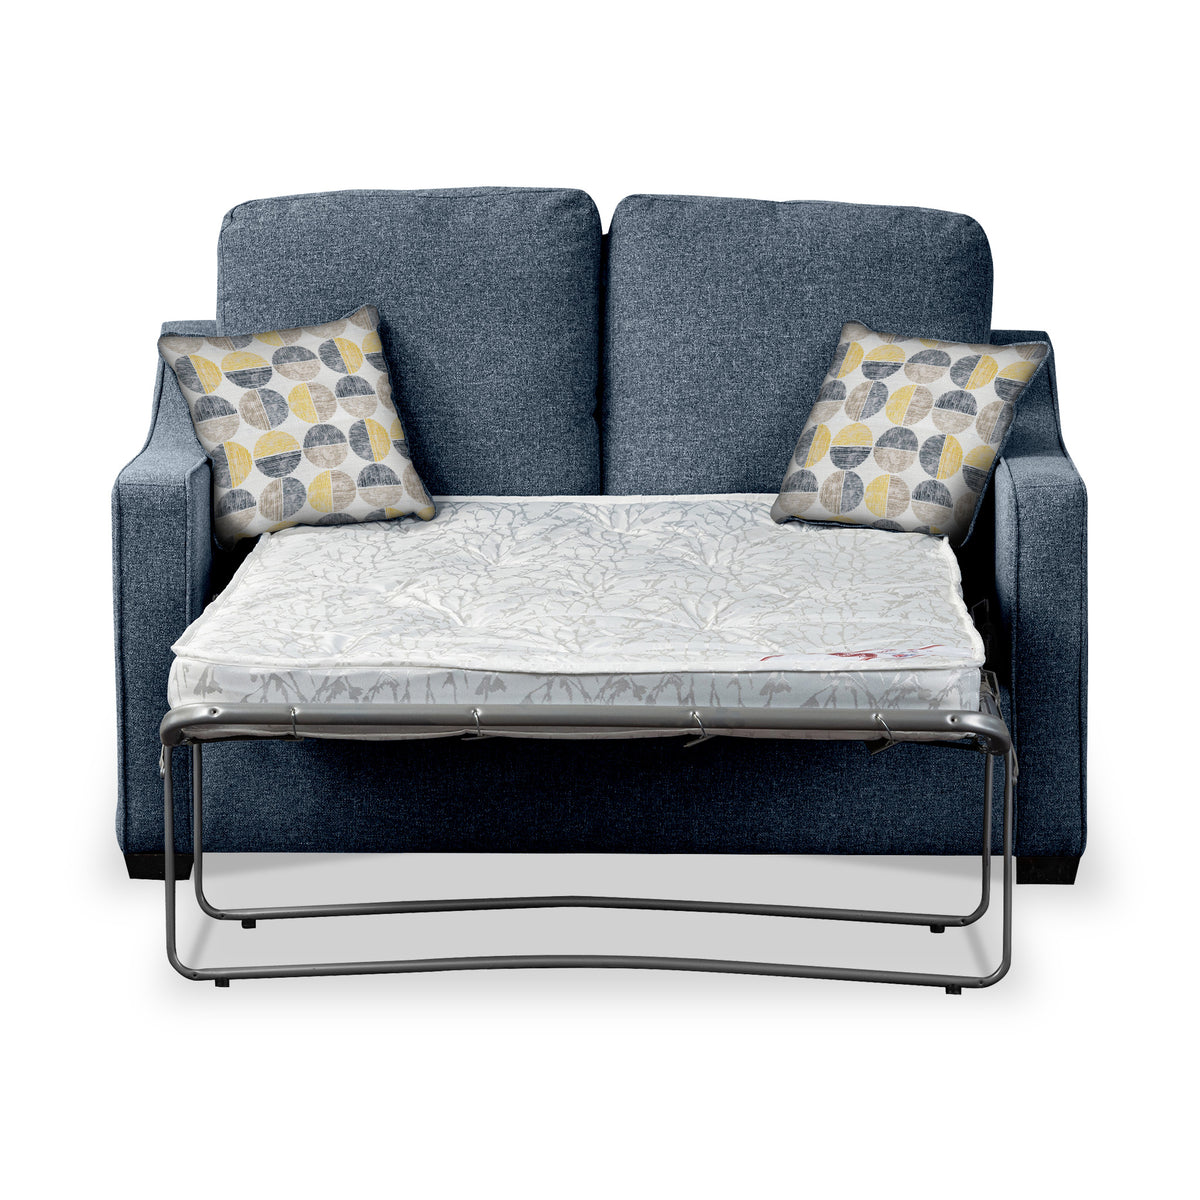 Fenton Midnight Soft Weave 2 Seater Sofabed with Beige Scatter Cushions from Roseland Furniture